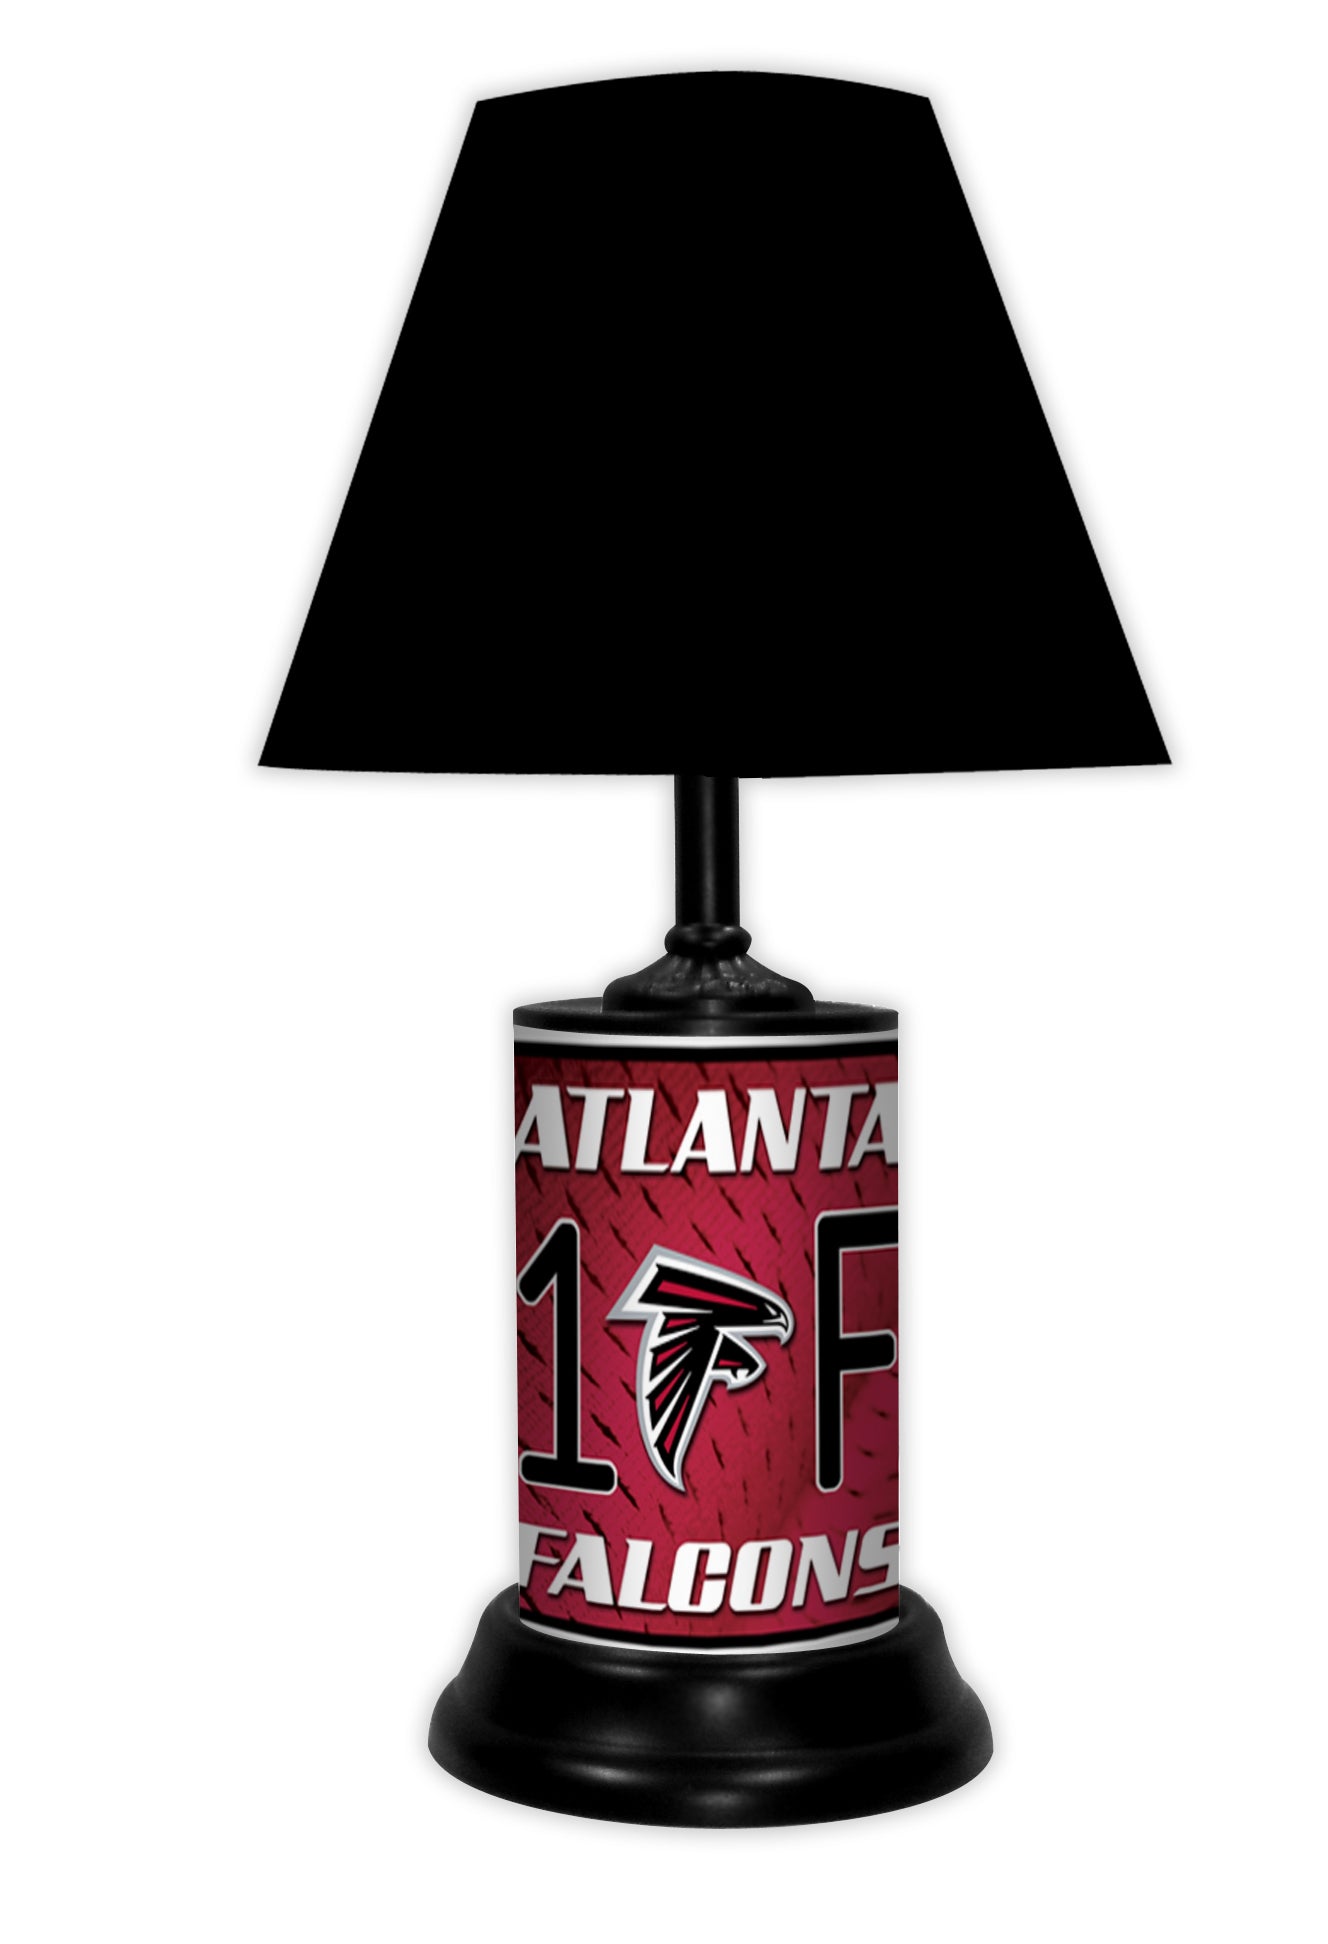 Atlanta Falcons #1 Fan Lamp - 18.5" tall with team logo and '#1 Fan' embossing. Officially licensed, made in the USA by Good Tymes.